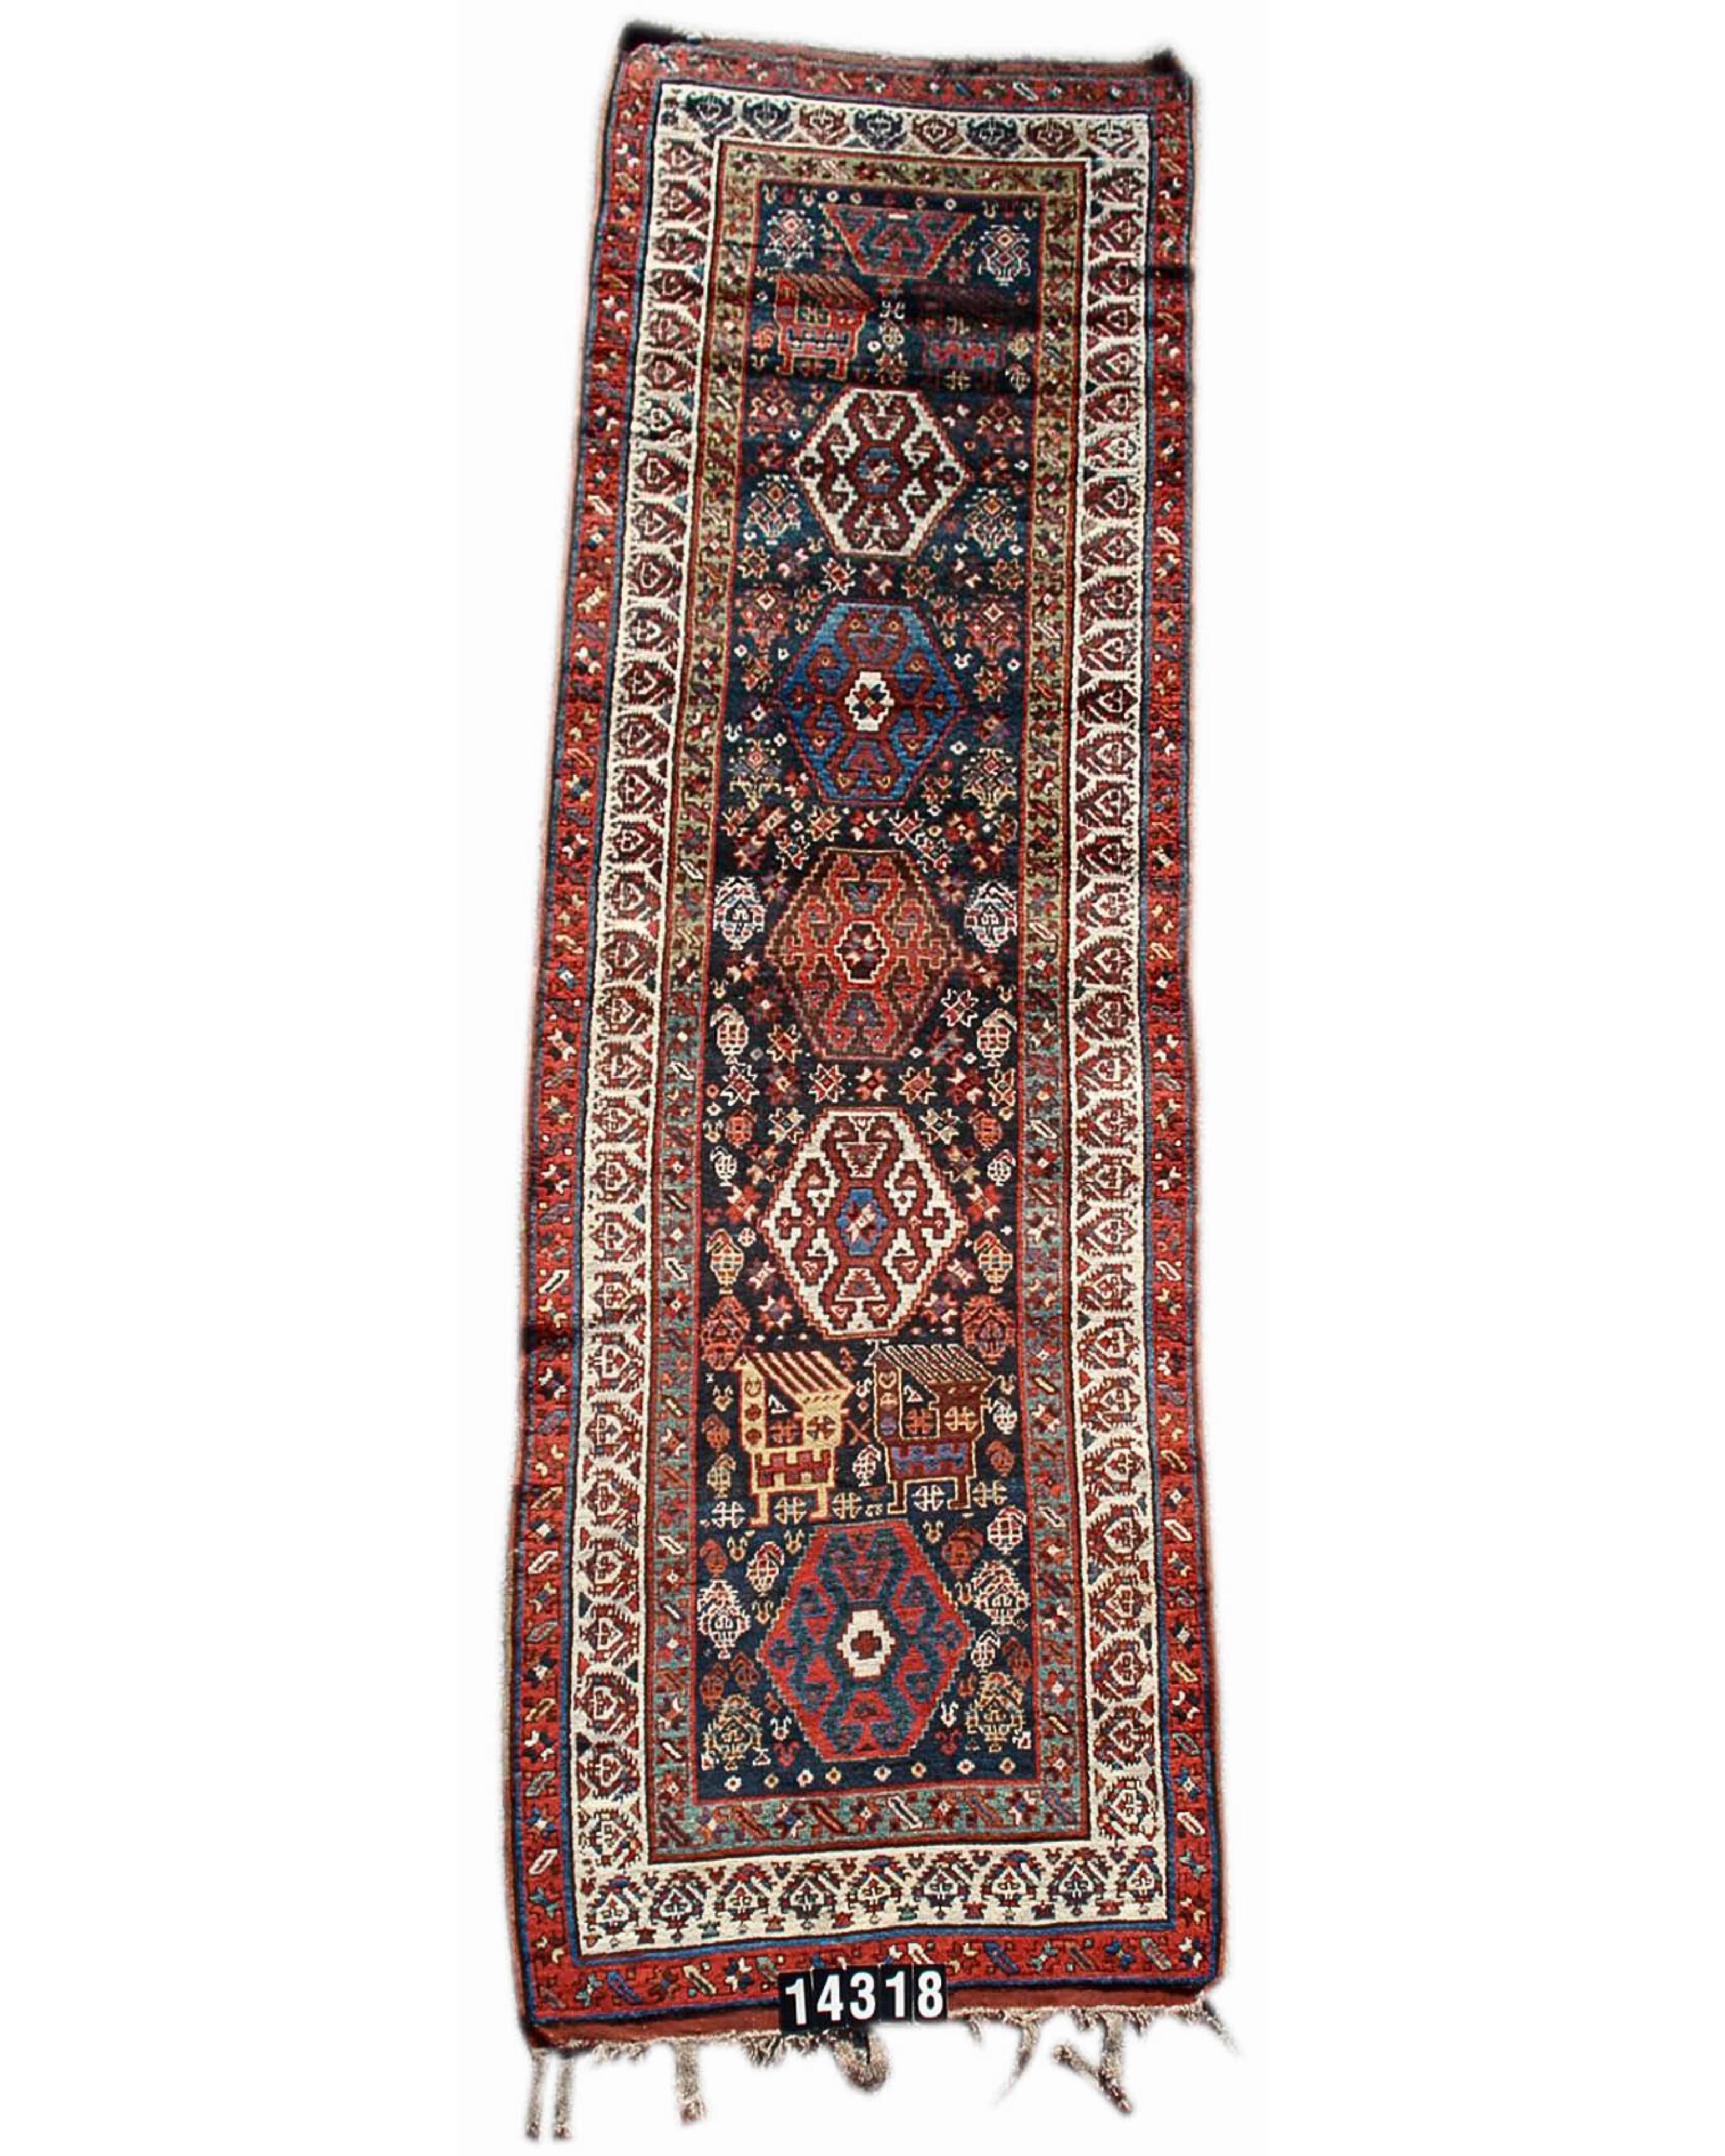 Antique Persian Shahsevan Runner Rug, 19th Century

Additional Information:
Dimensions: 3'7